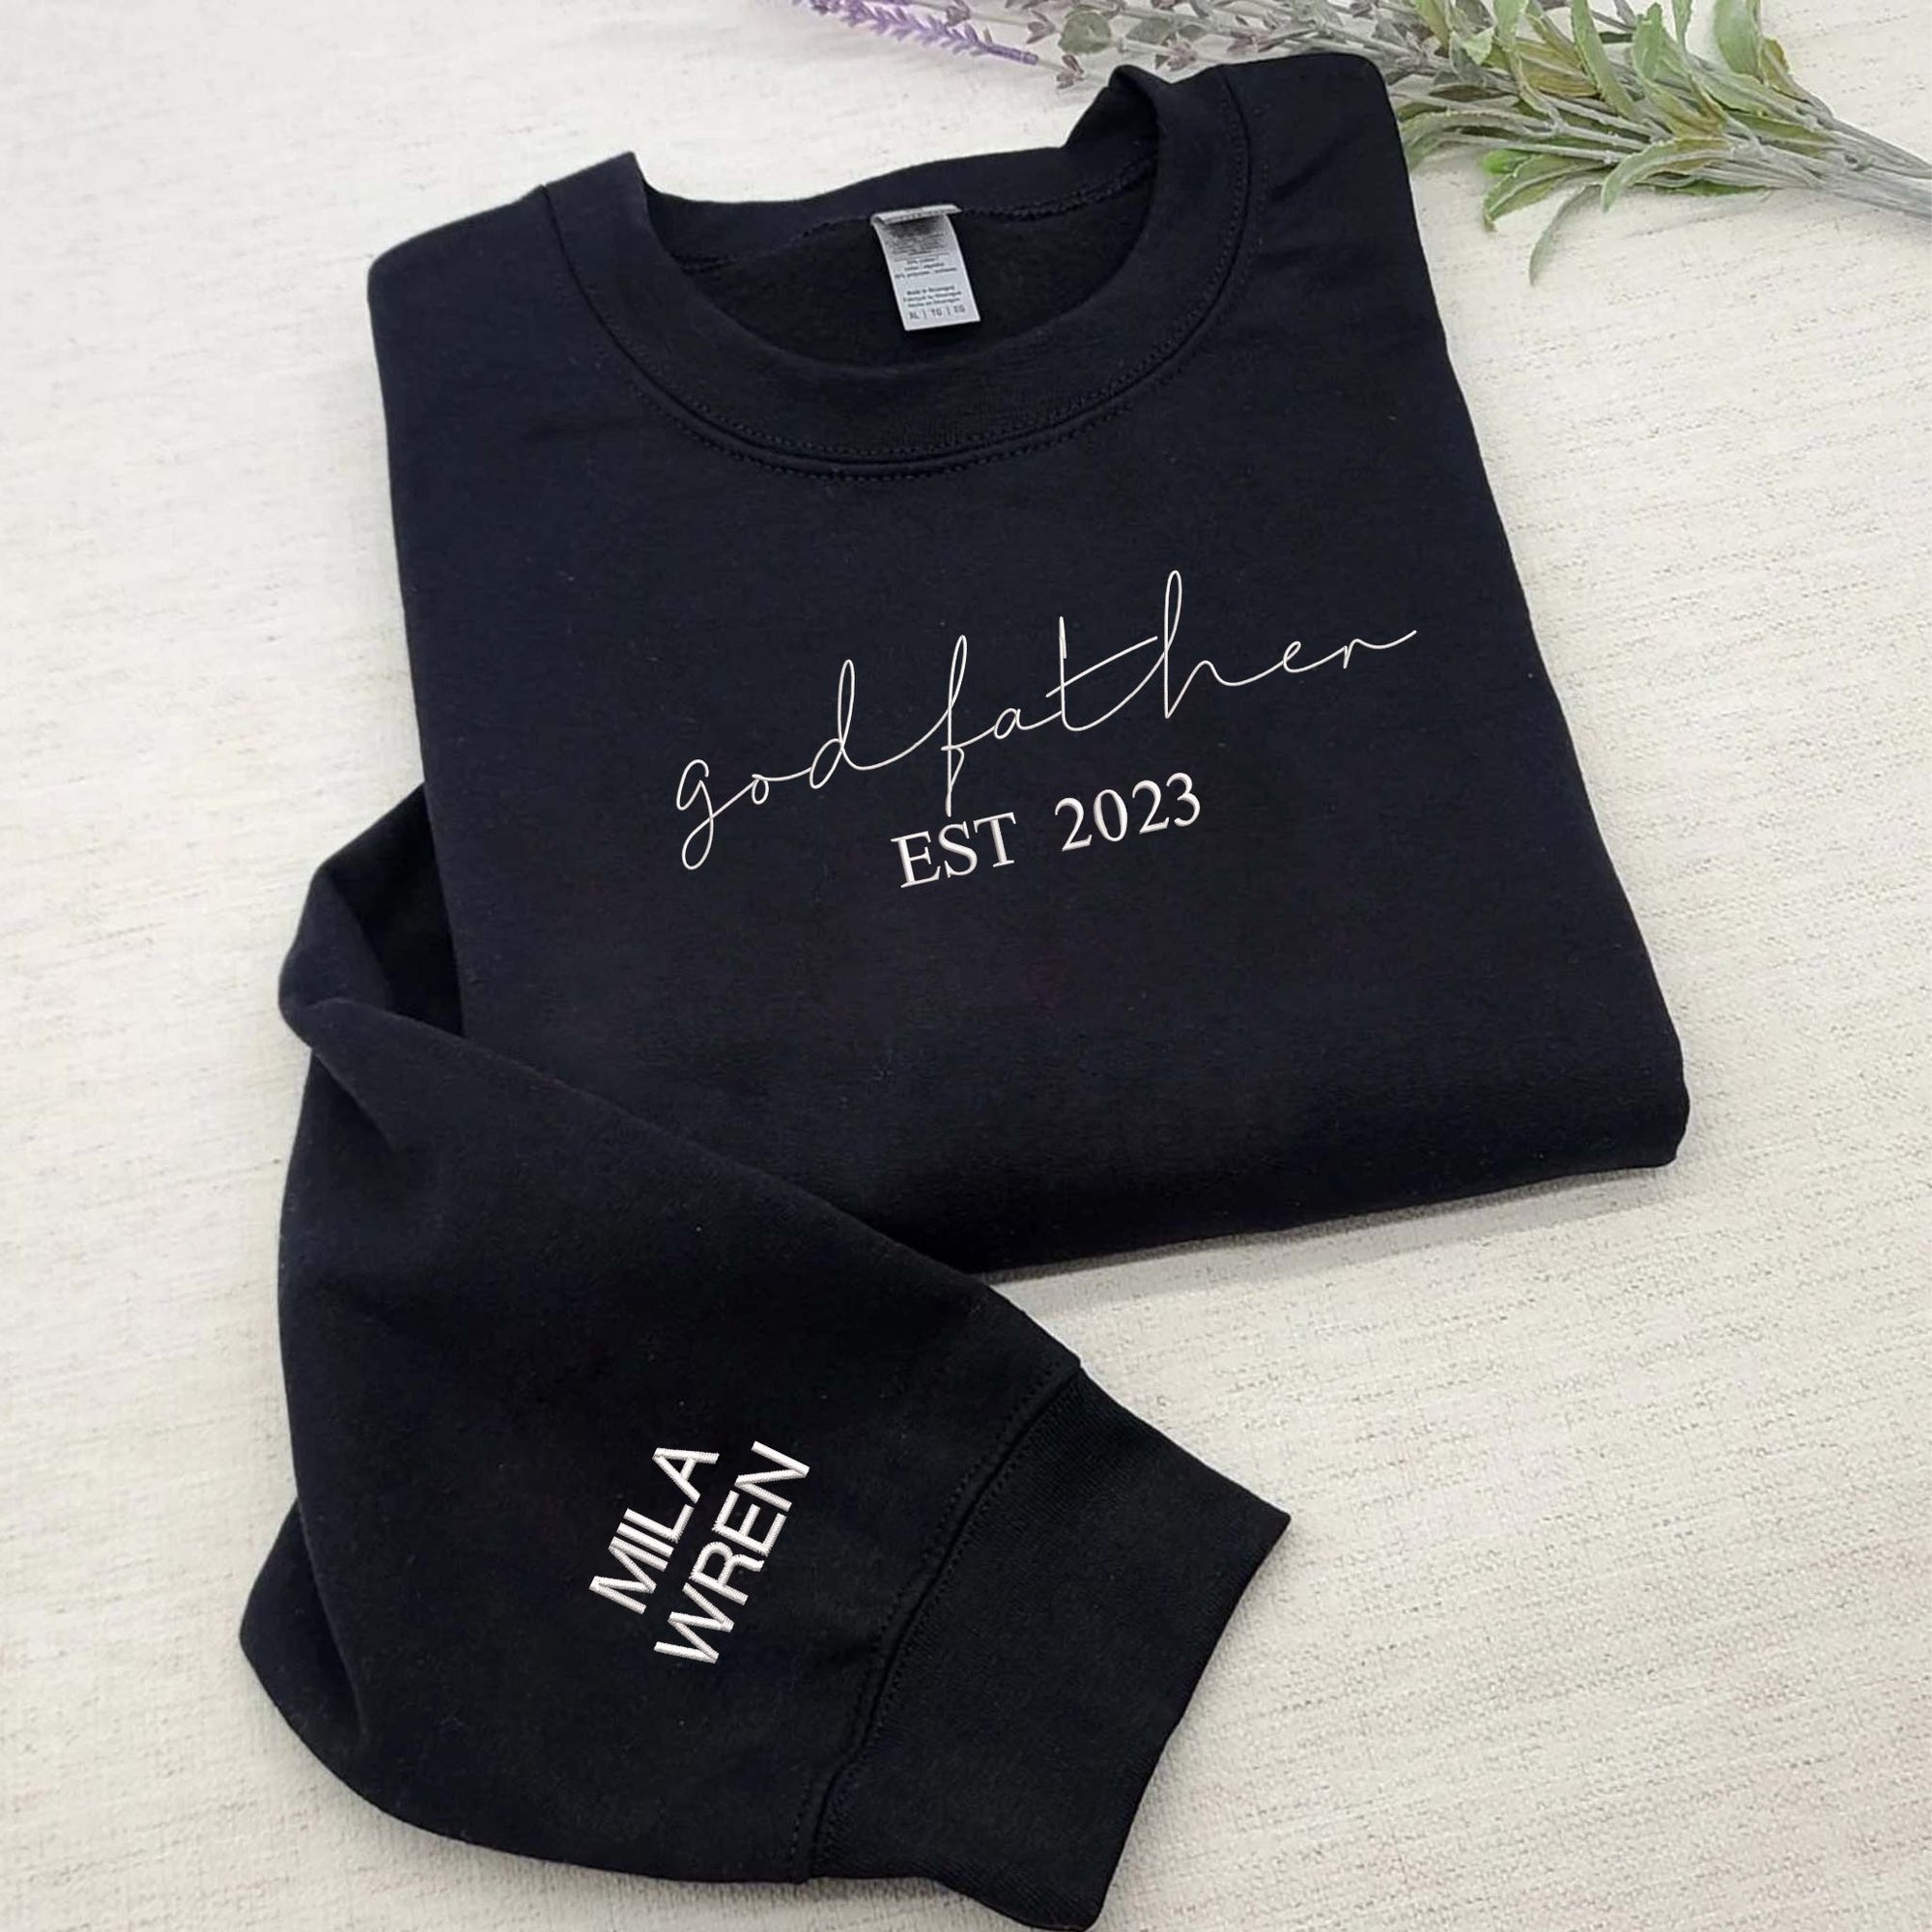 Custom God Father EST Sweatshirt With Kids Name On Sleeve, Best Godfather Gifts From Godson